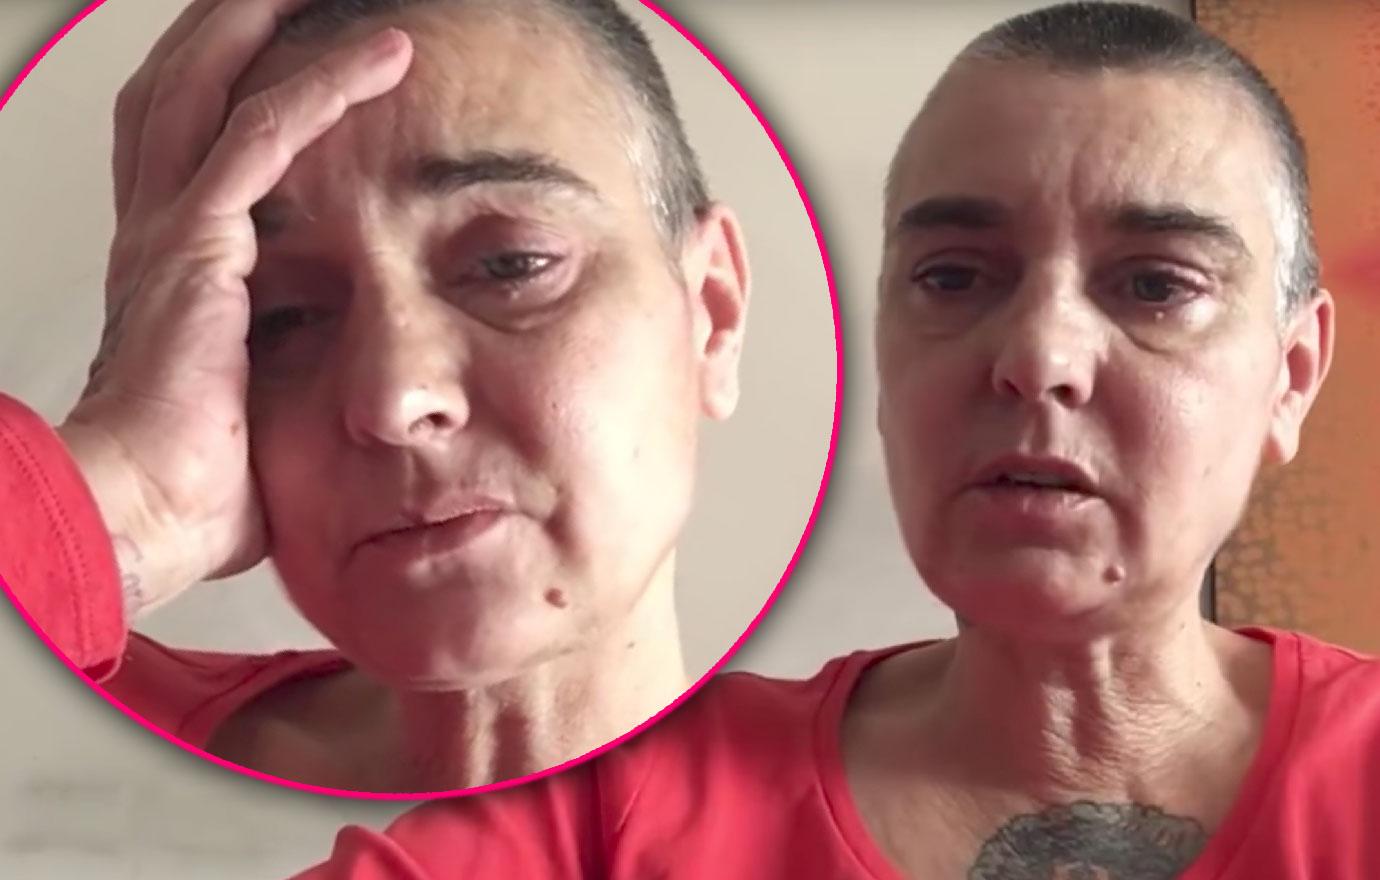 Sinead O’Connor Heads Back To Hospital After Latest Breakdown